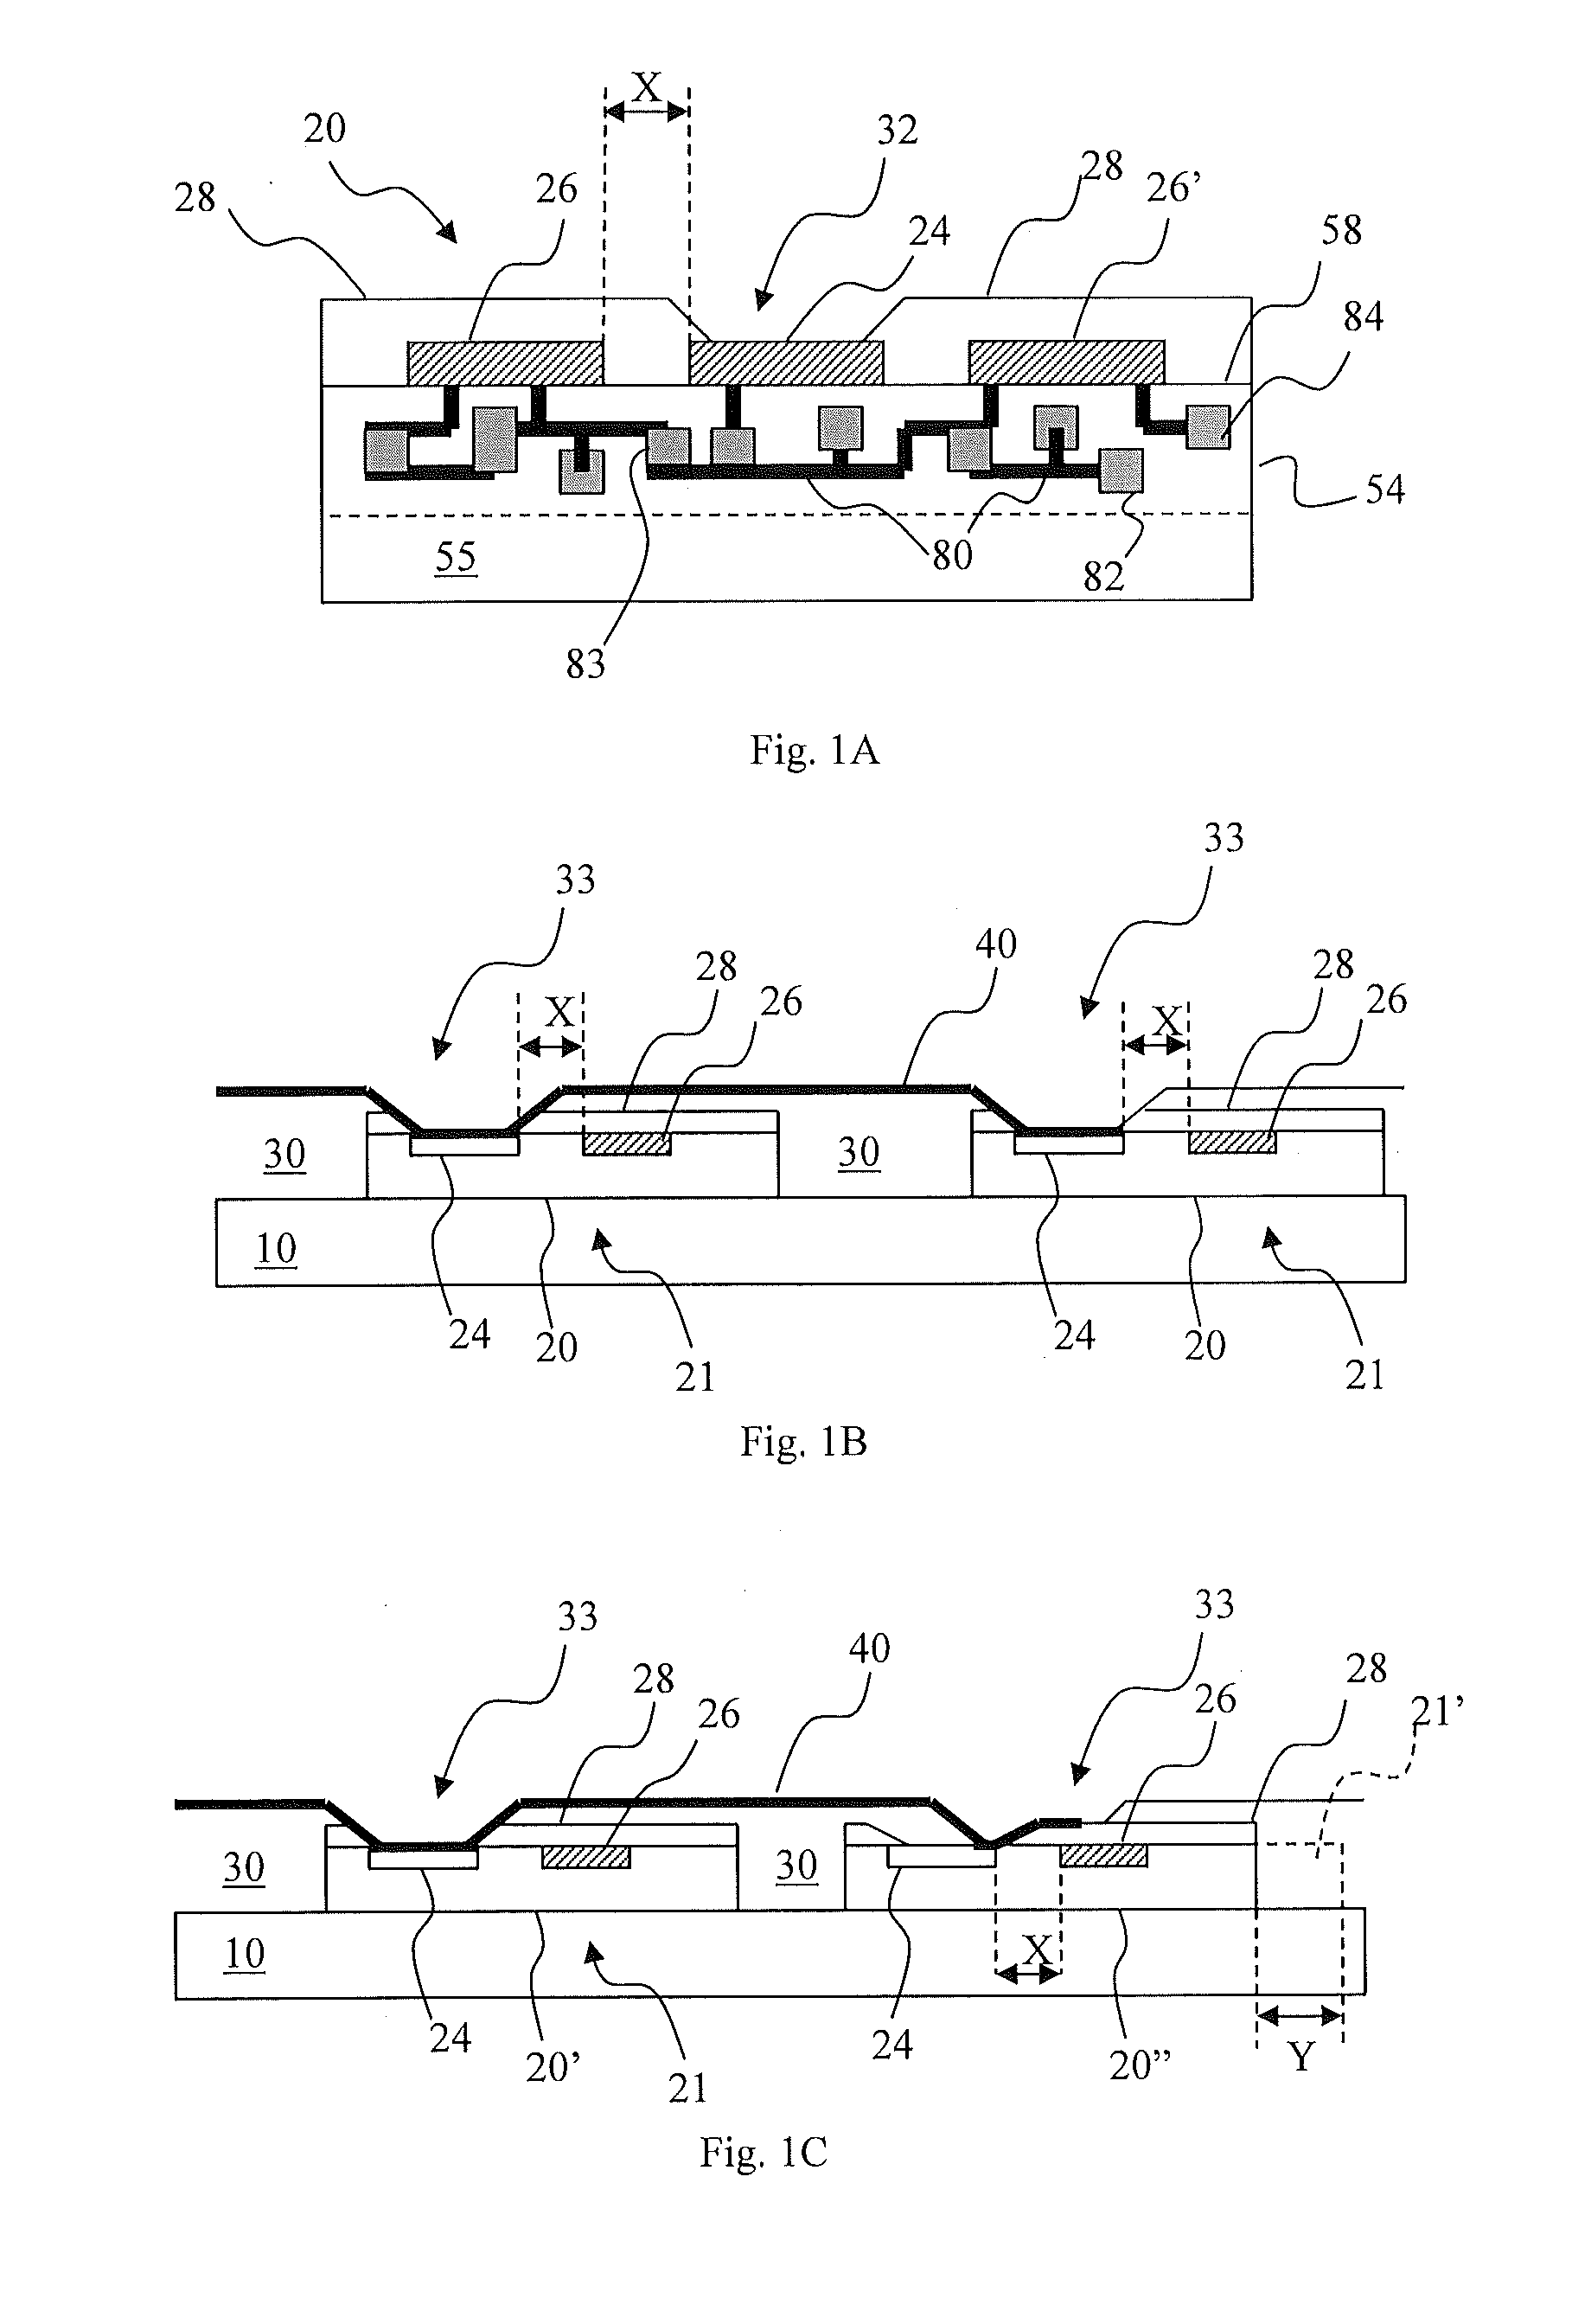 Interconnection structures and methods for transfer-printed integrated circuit elements with improved interconnection alignment tolerance